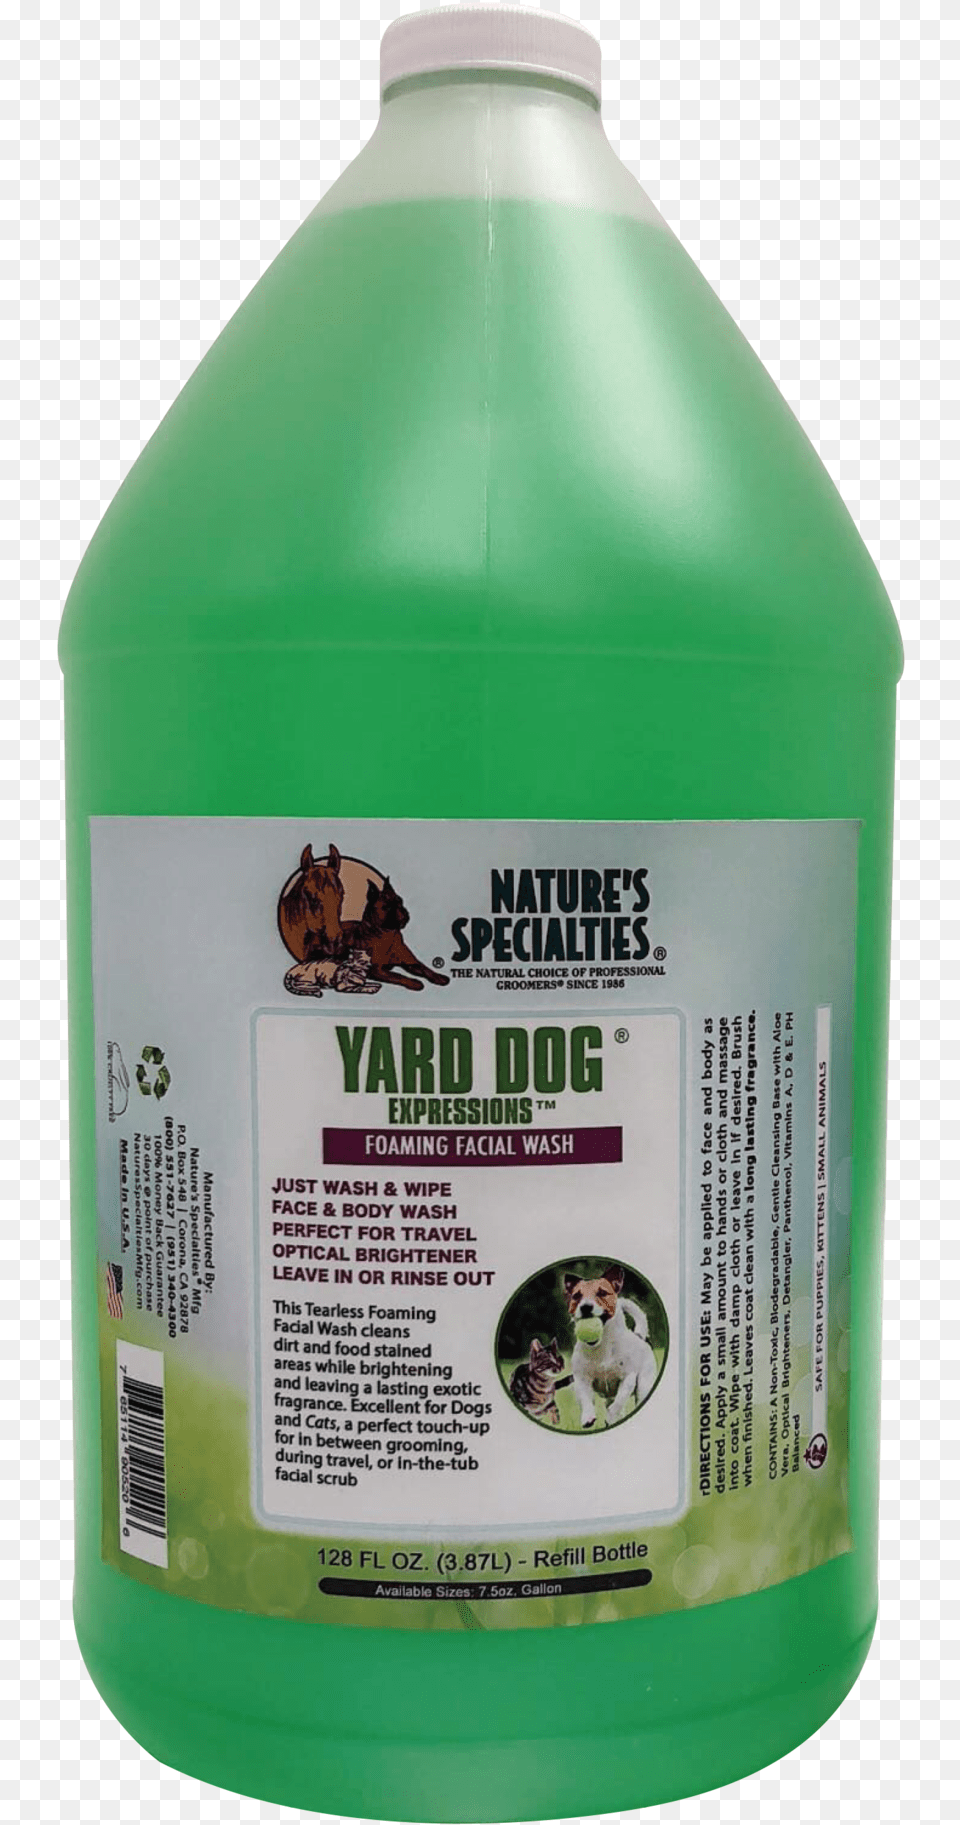 Yard Dog Expressions For Dogs Amp Catsdata Zoom Nature39s Specialties Yard Dog, Herbal, Plant, Herbs, Pet Free Png